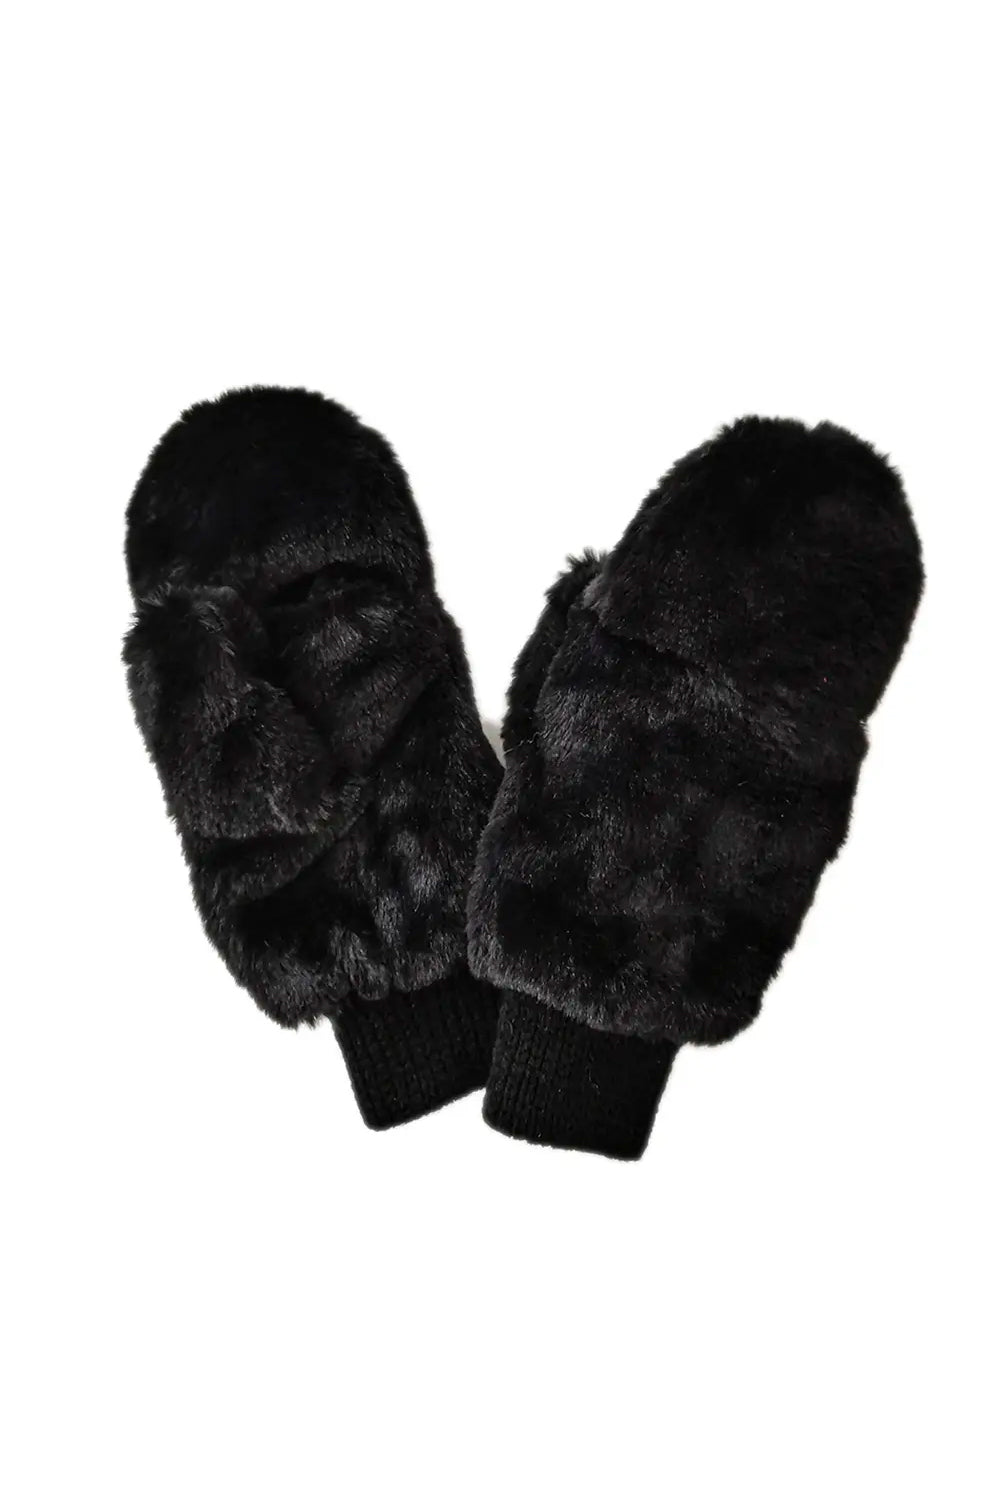 Solid Convertible Faux Fur Mittens - Mittens - The Green Brick Boutique